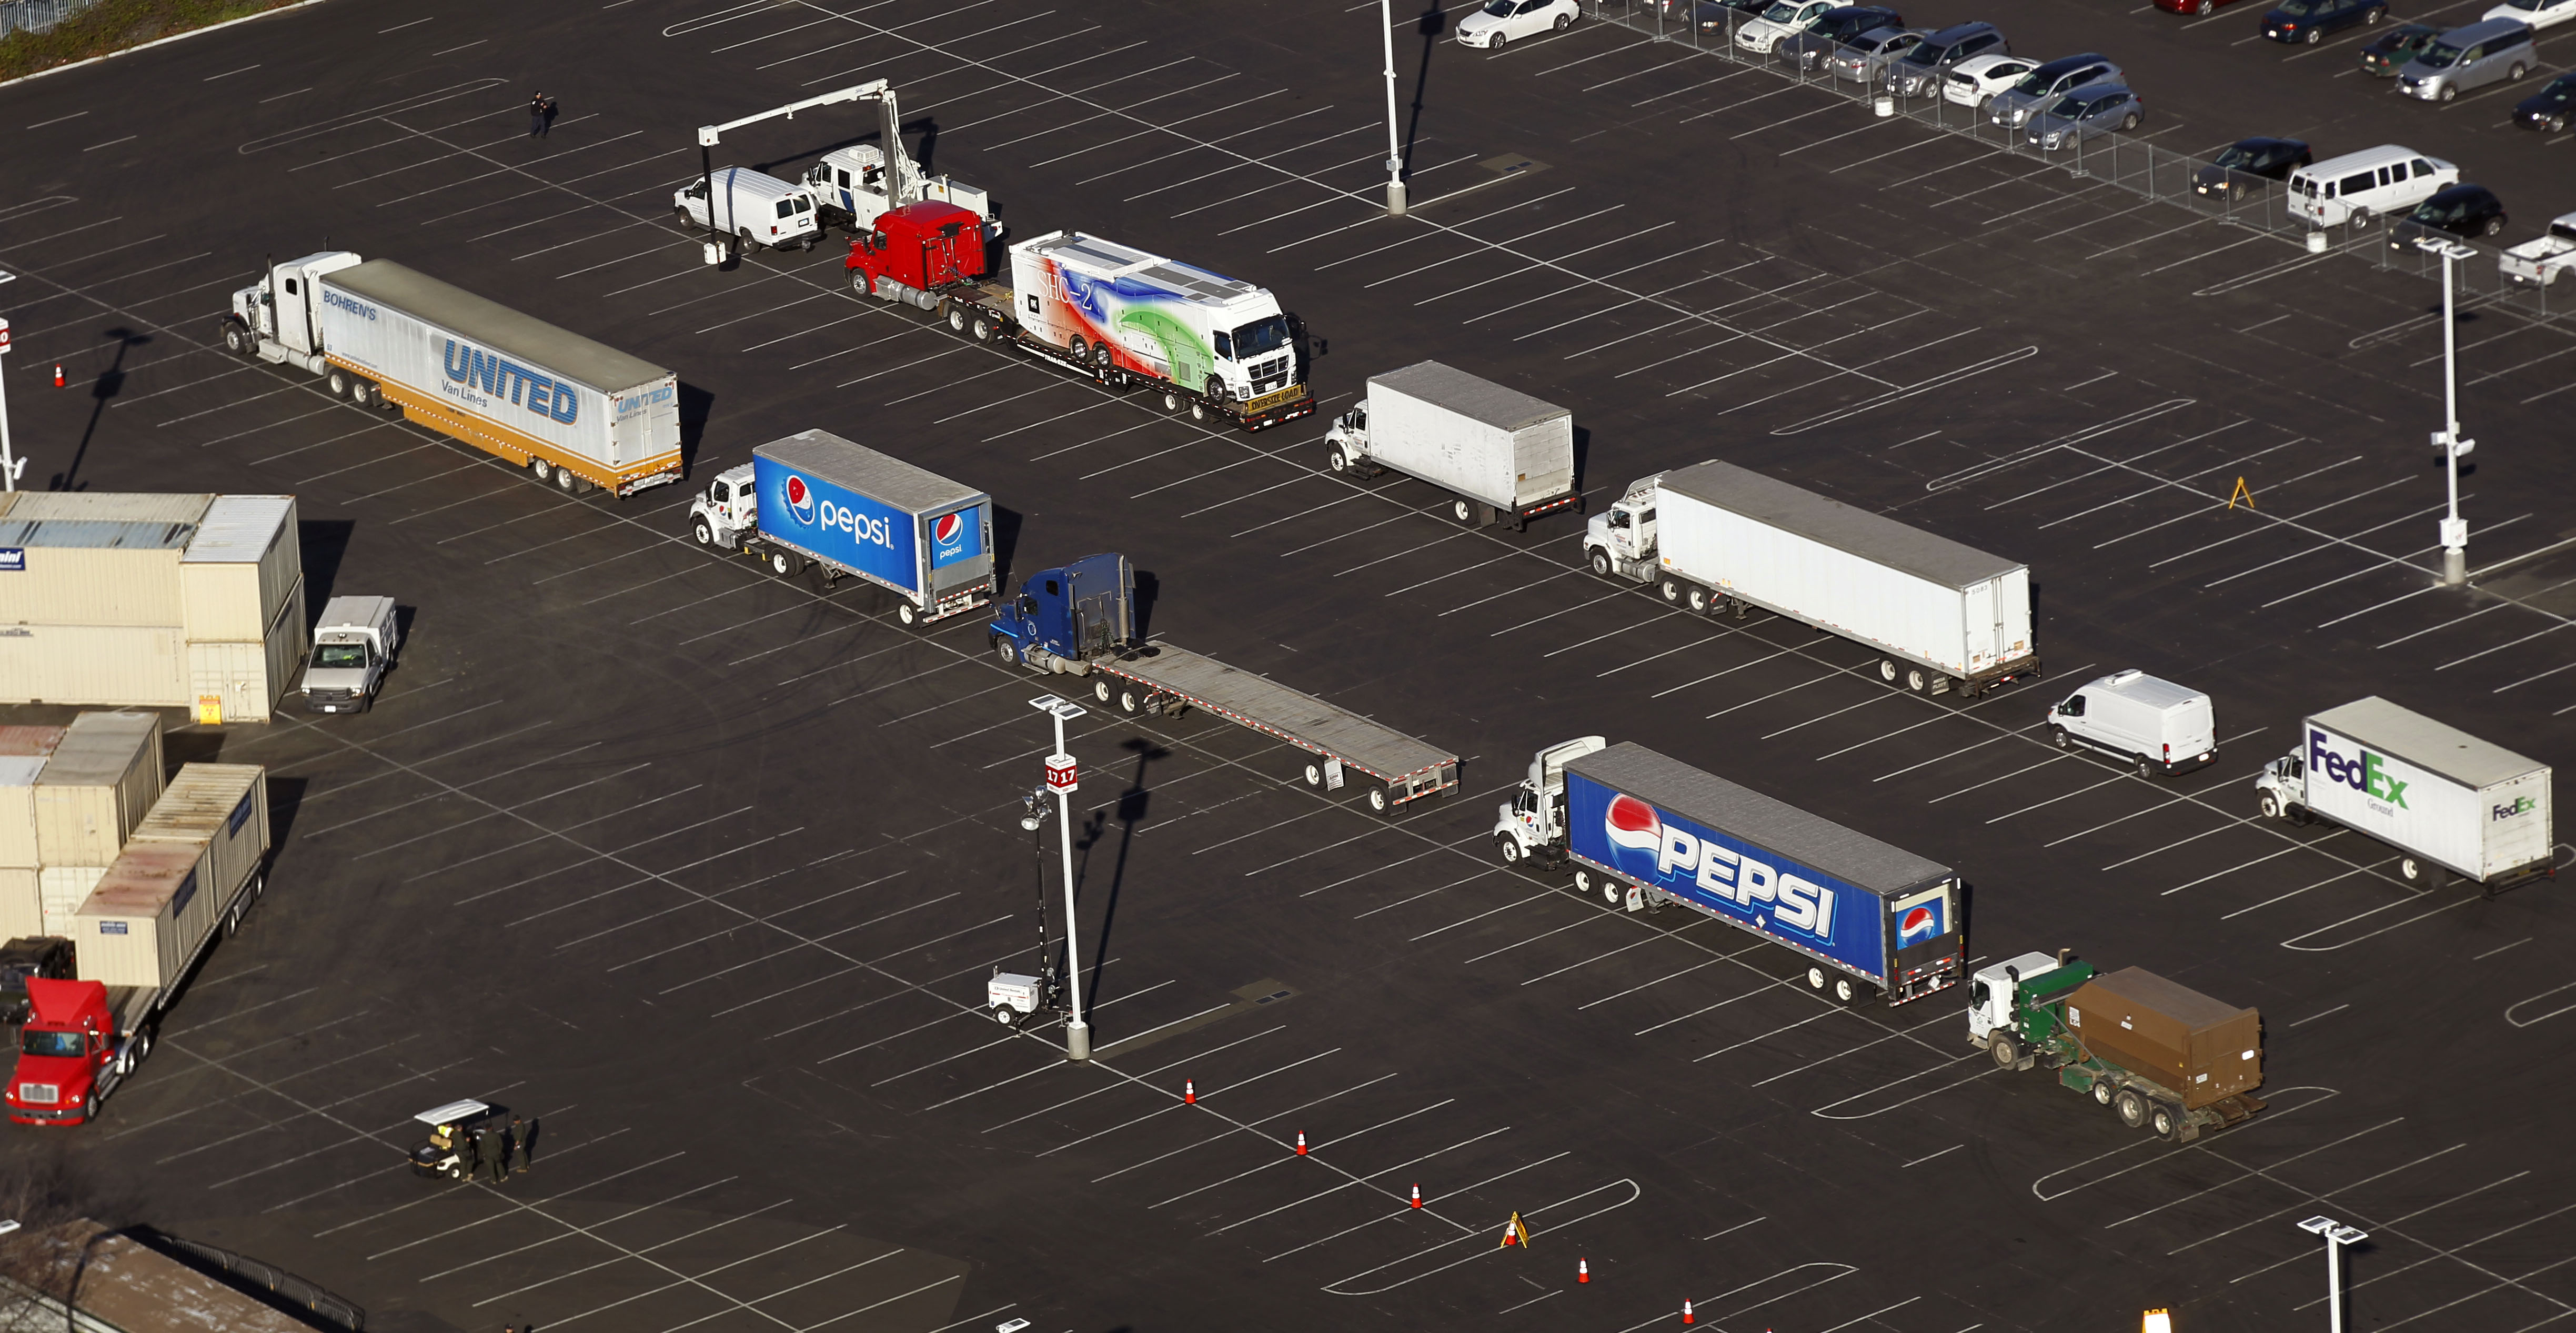 Photo of trucks lined up next to Levi's Stadium for X-ray screening before deliveries to the stadium are authorized